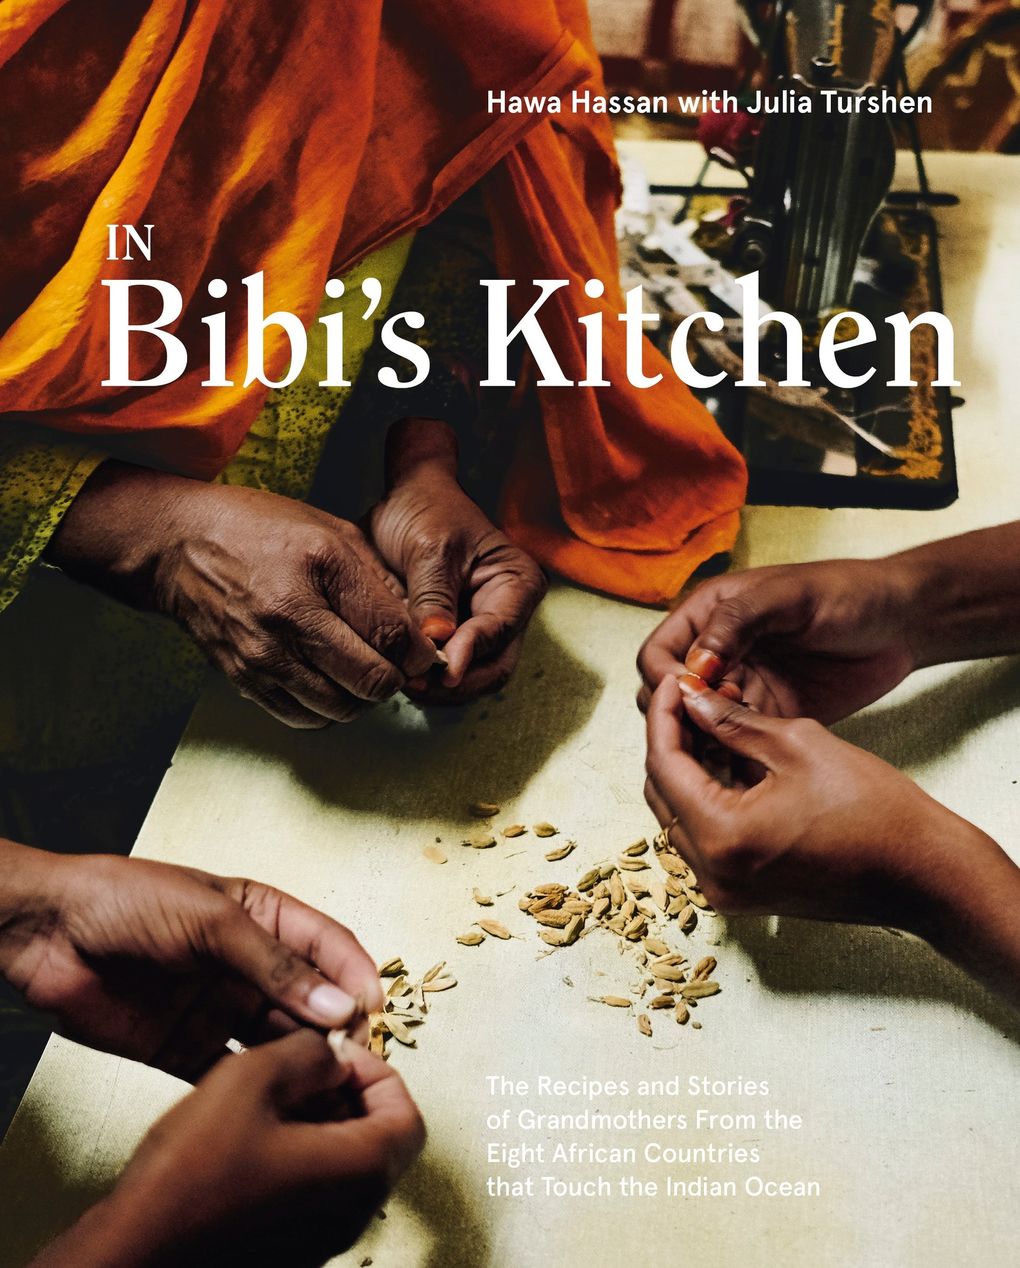 Co-written with Julia Turshen, Hawa Hassan’s cookbook “In Bibi’s Kitchen” was released in October 2020 and has been critically lauded by national media.  (Penguin Random House)